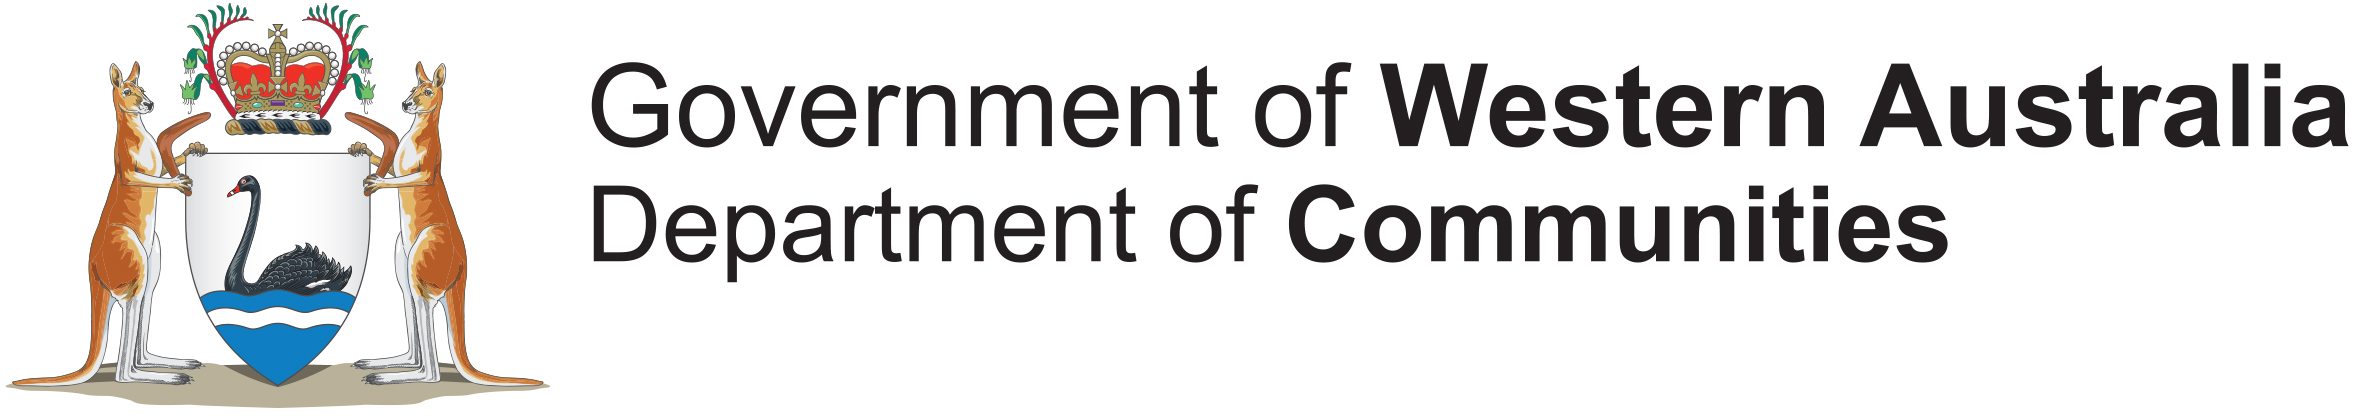 Government of Western Australia, Department of Communities